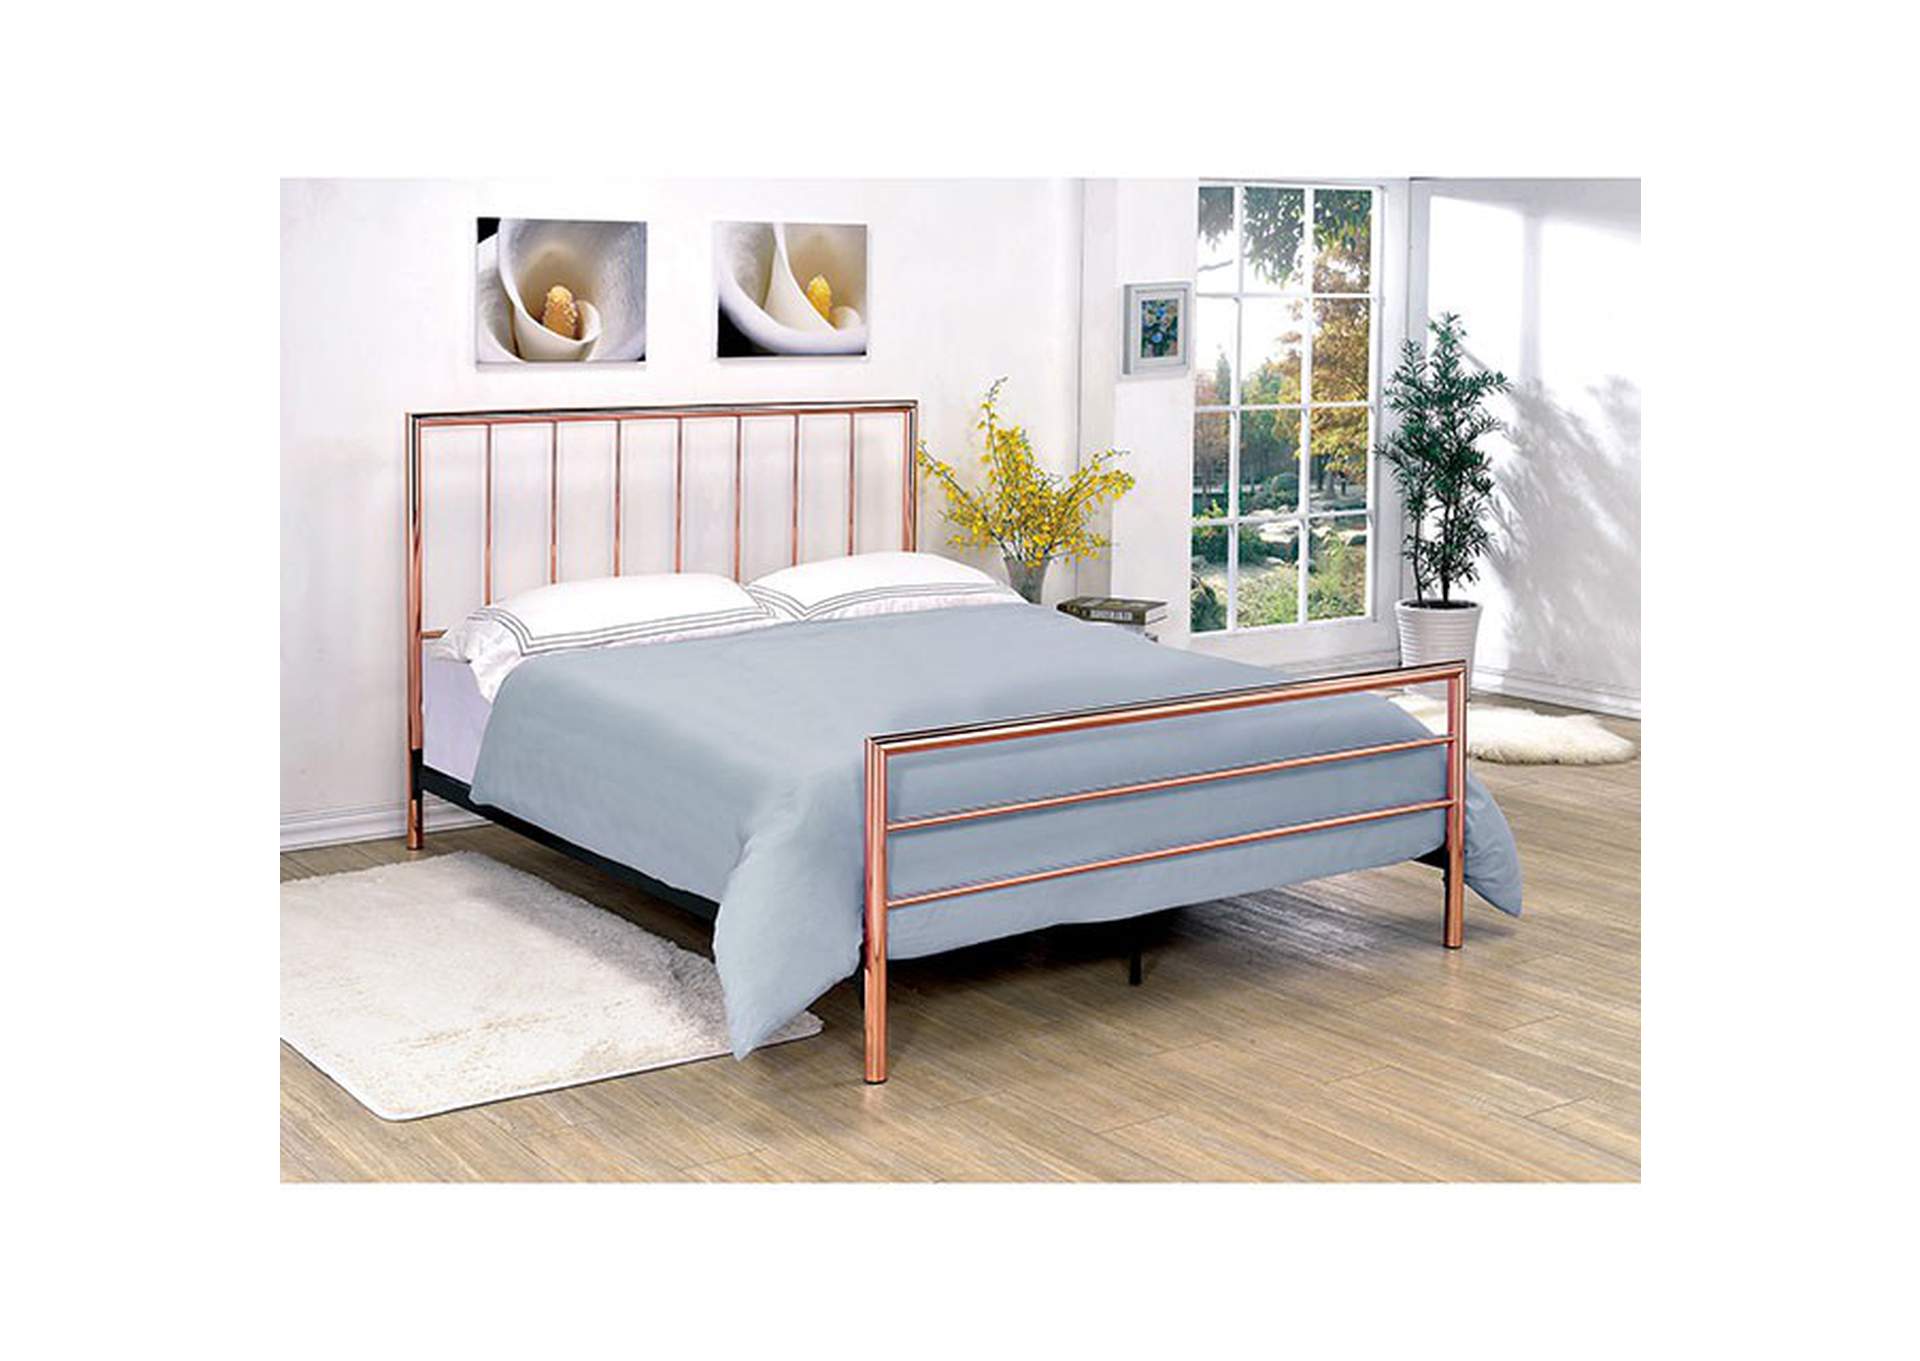 Diana Queen Bed Palace Furniture, Rose Gold Headboard Queen